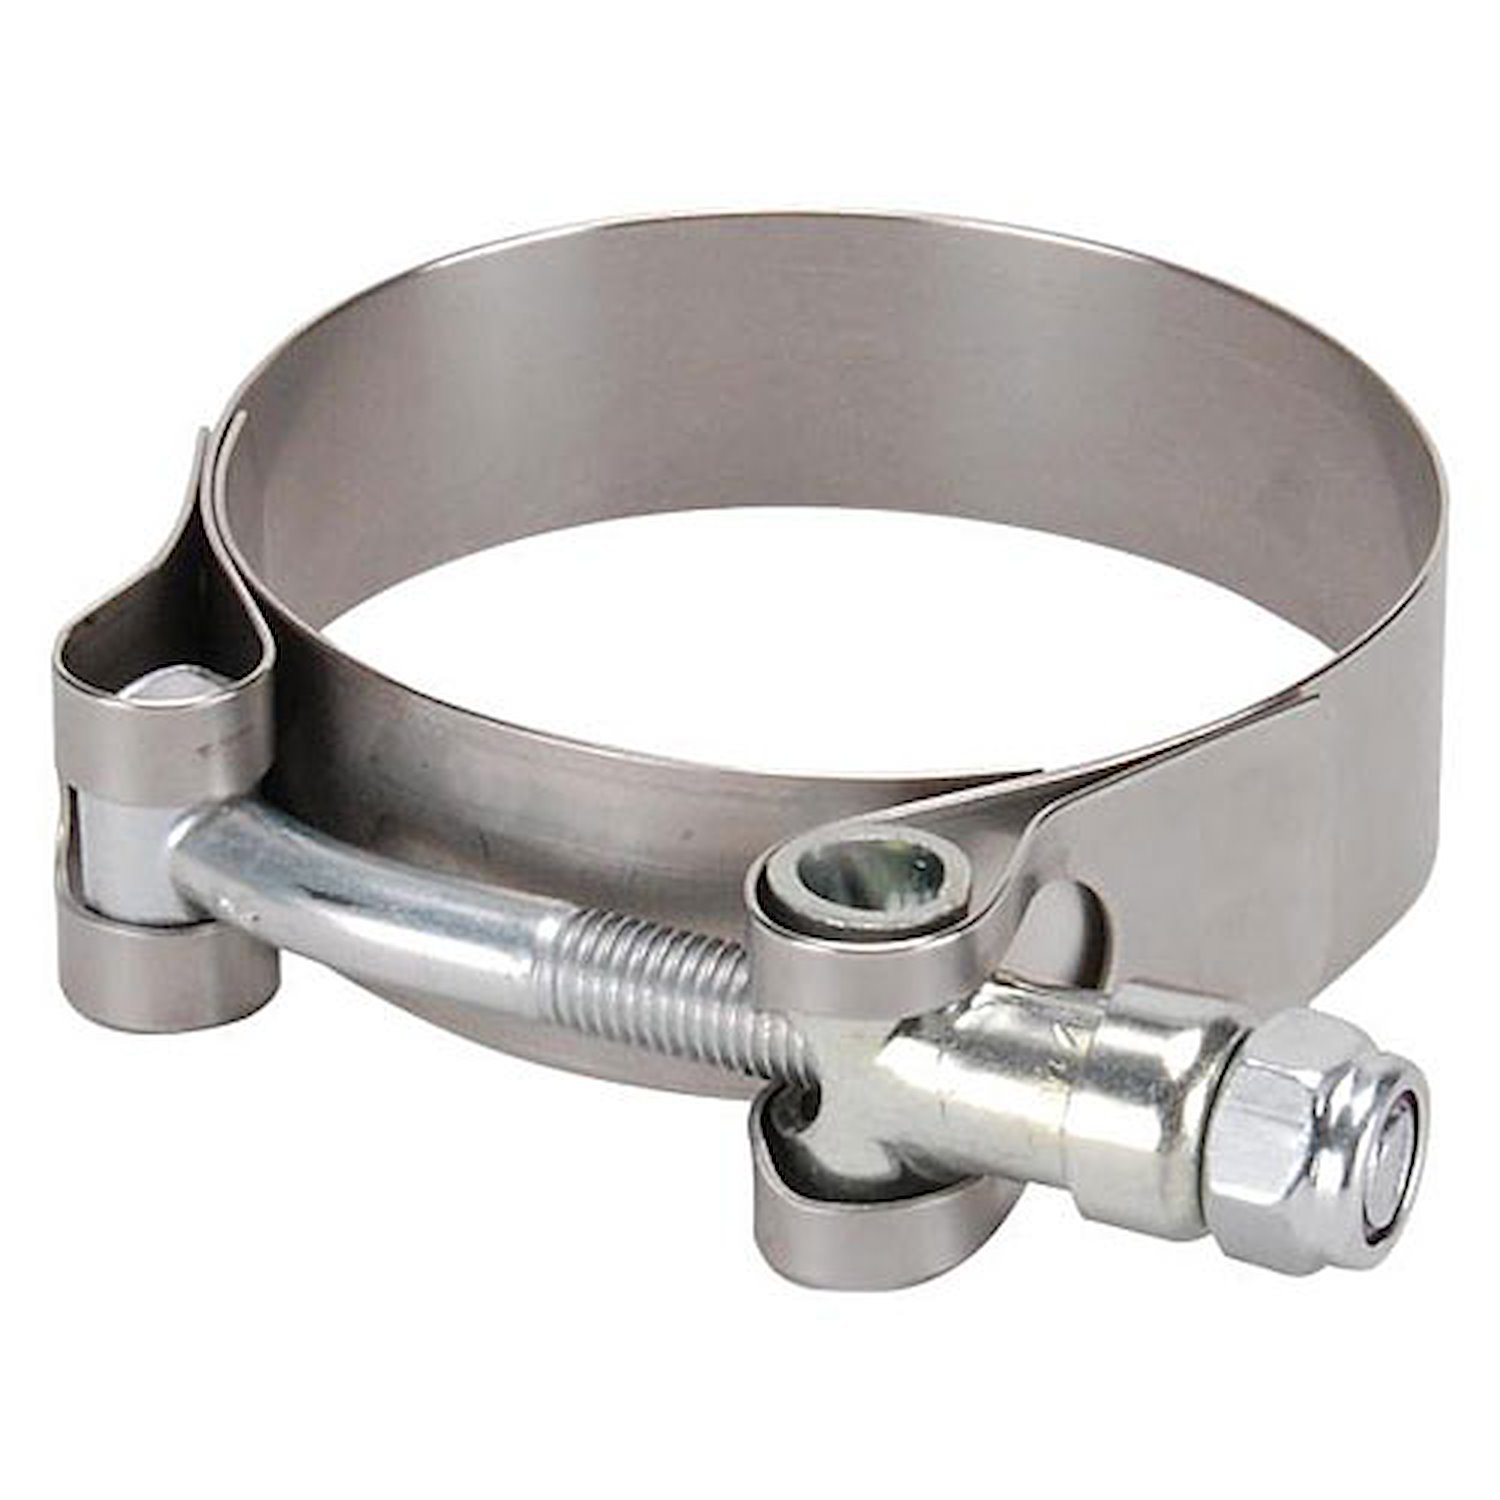 Stainless Steel Wideband T-Bar Clamp Diameter: 1.88" to 2.19"